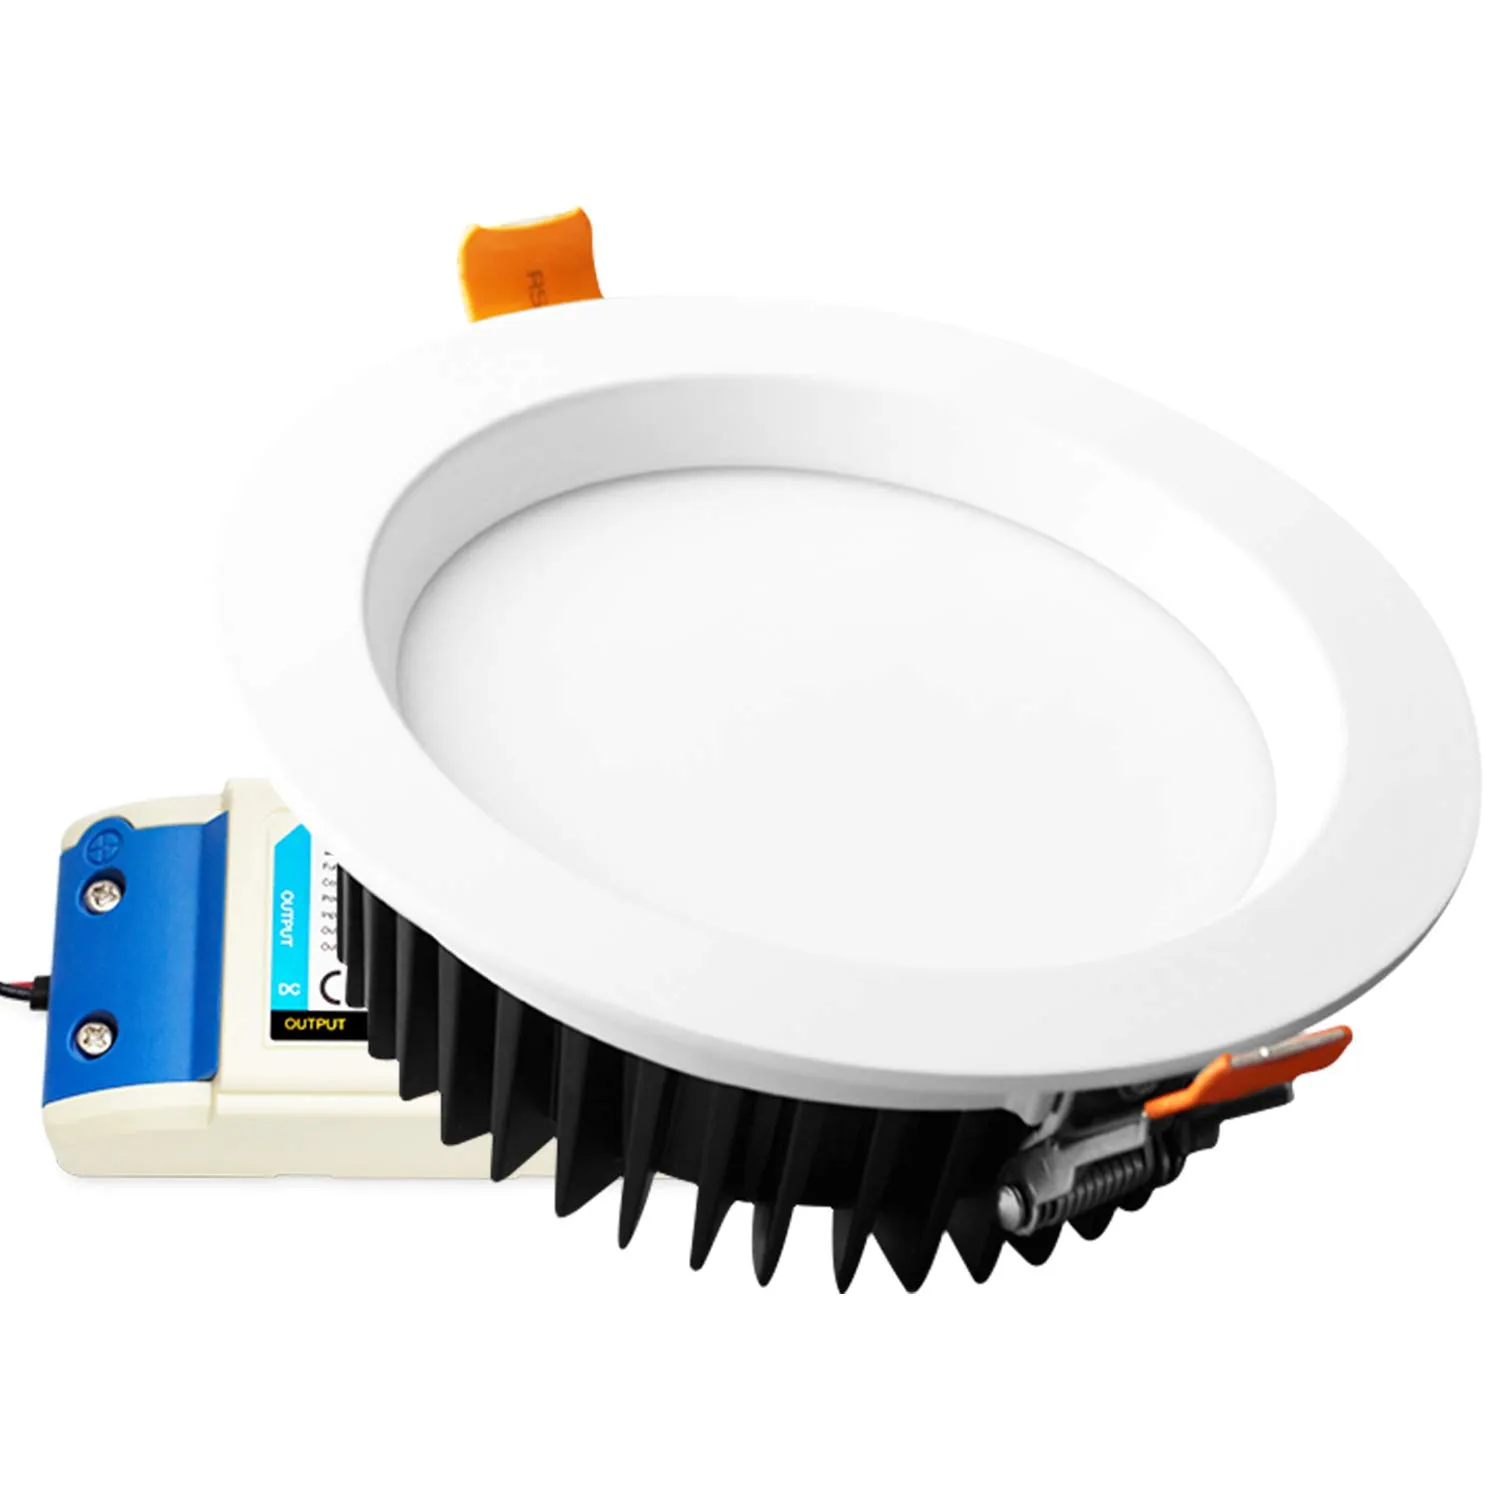 6W Downlight Dual White and Color